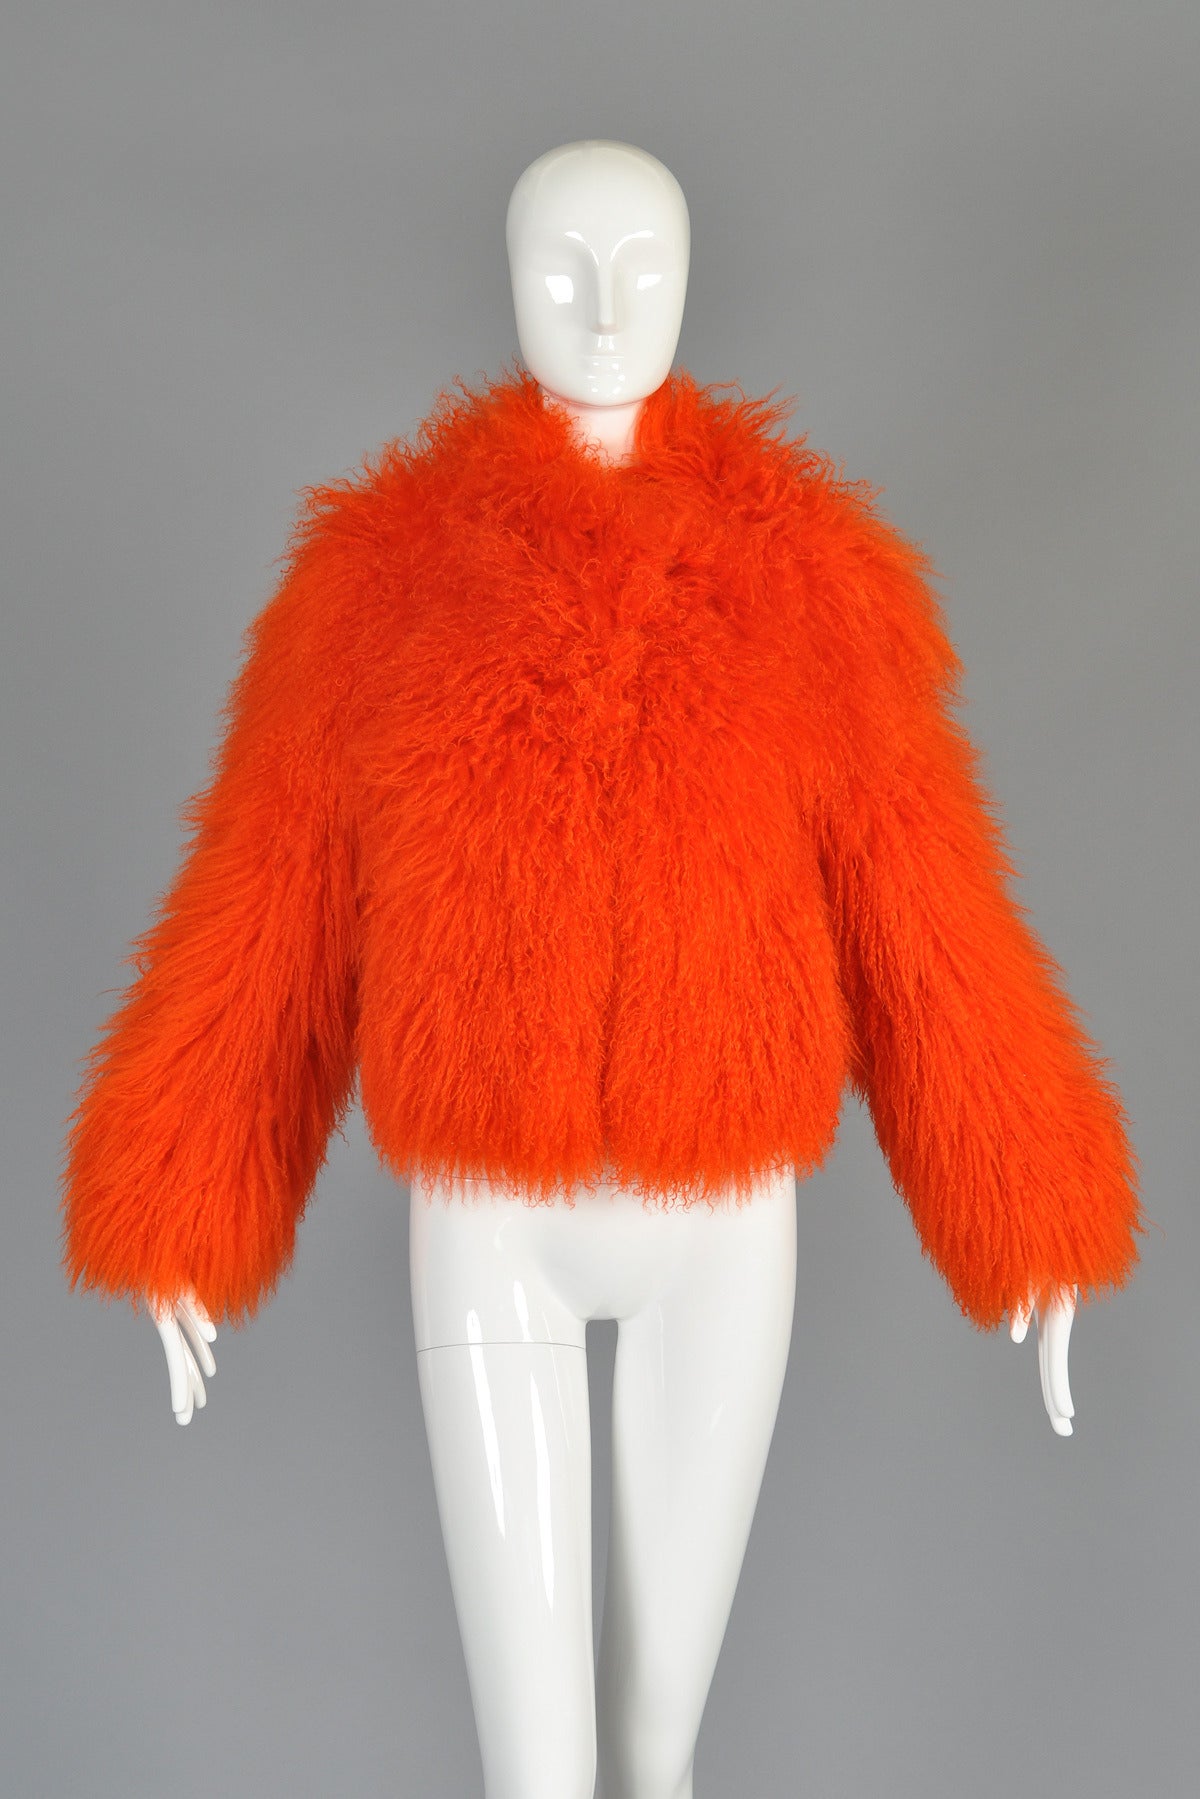 Seriously awesome bright bright bright orange Tibetan lamb fur coat by Sonia Rykiel. Such a rad piece! Ultra short waist-length crop with long sleeves and ultra ultra shaggy long hair. Fully lined with hidden fur hook closures and pockets. Pristine